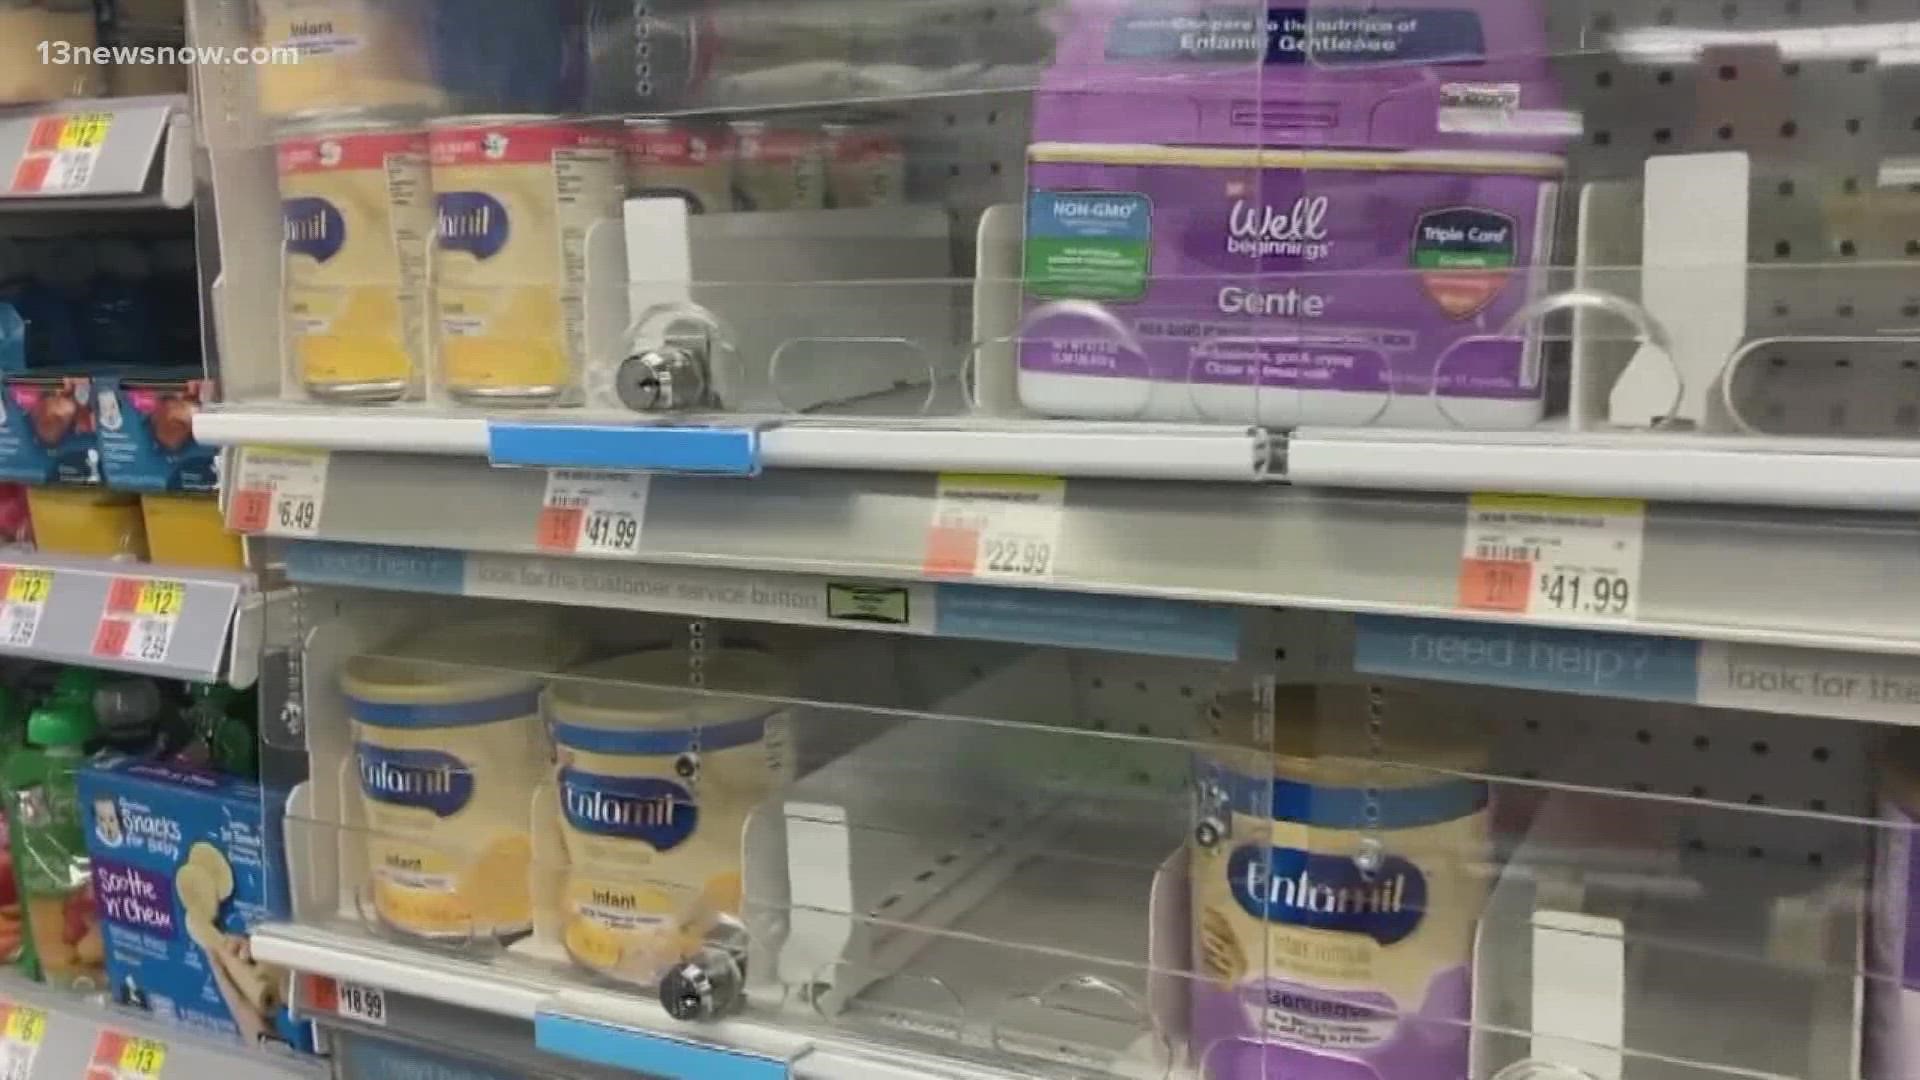 Abbott Nutrition has restarted production at the Michigan baby formula factory that has been closed for months due to contamination, the company said Saturday.